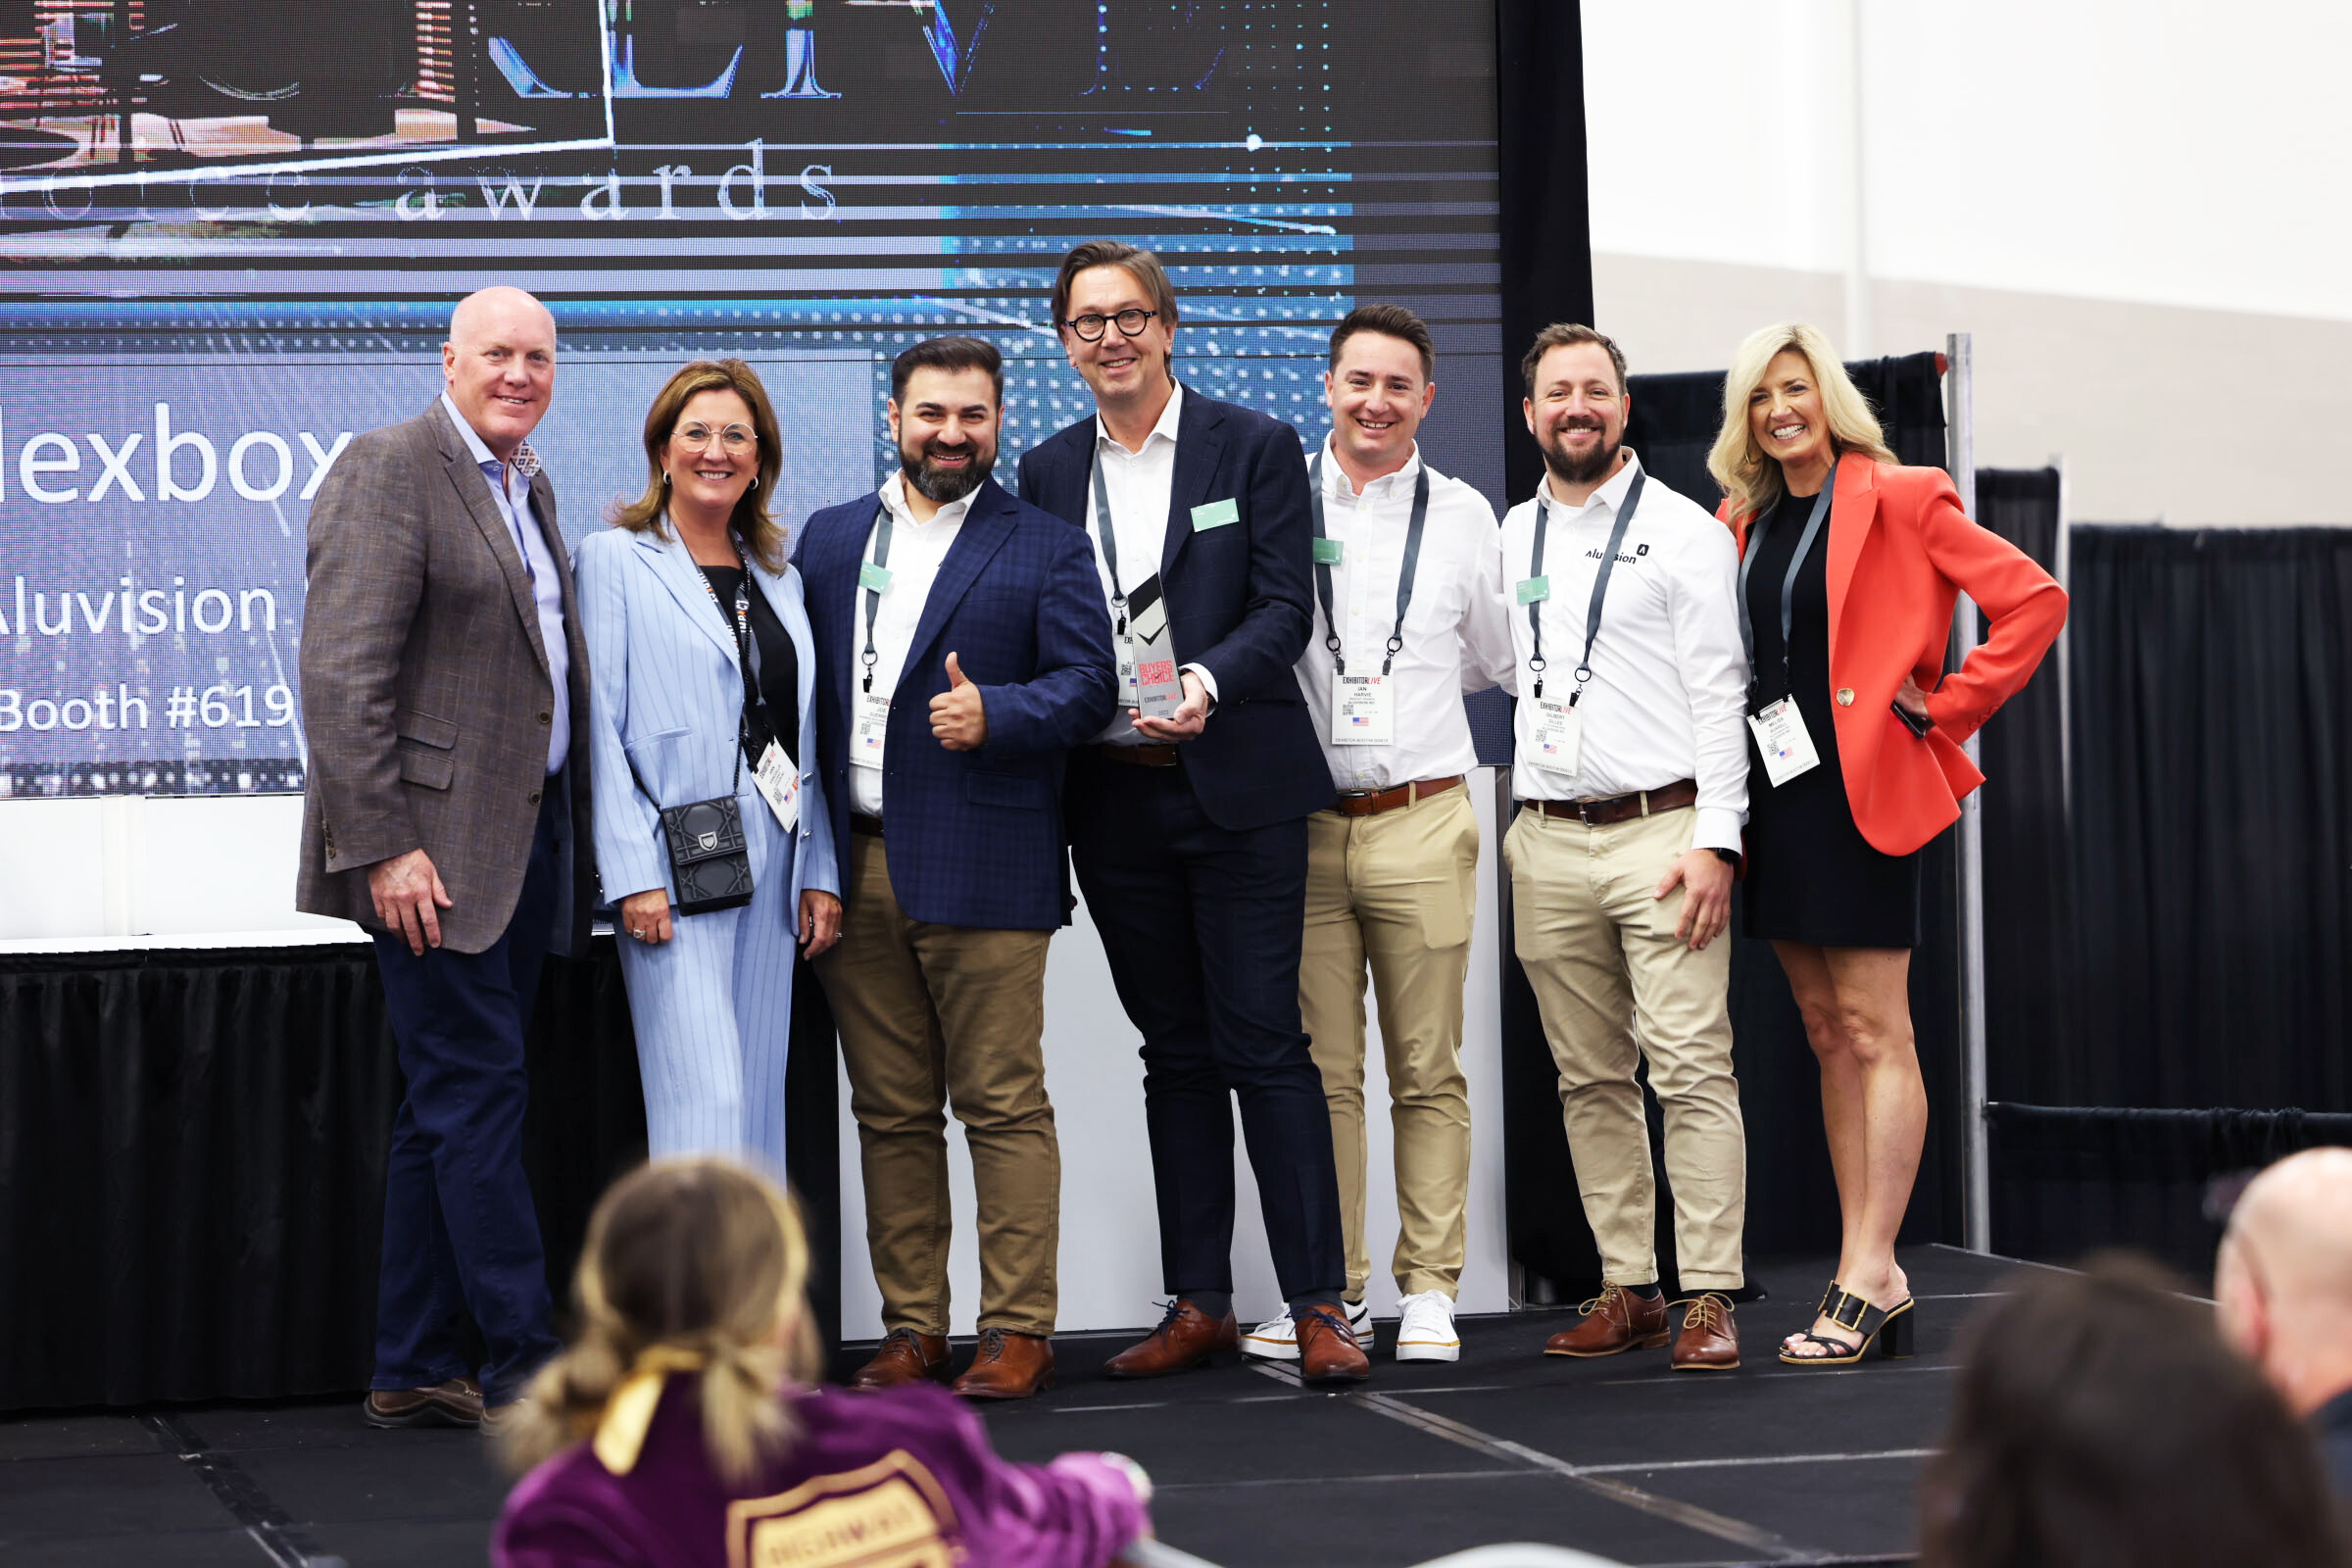 3 Awards for Aluvision at ExhibitorLive